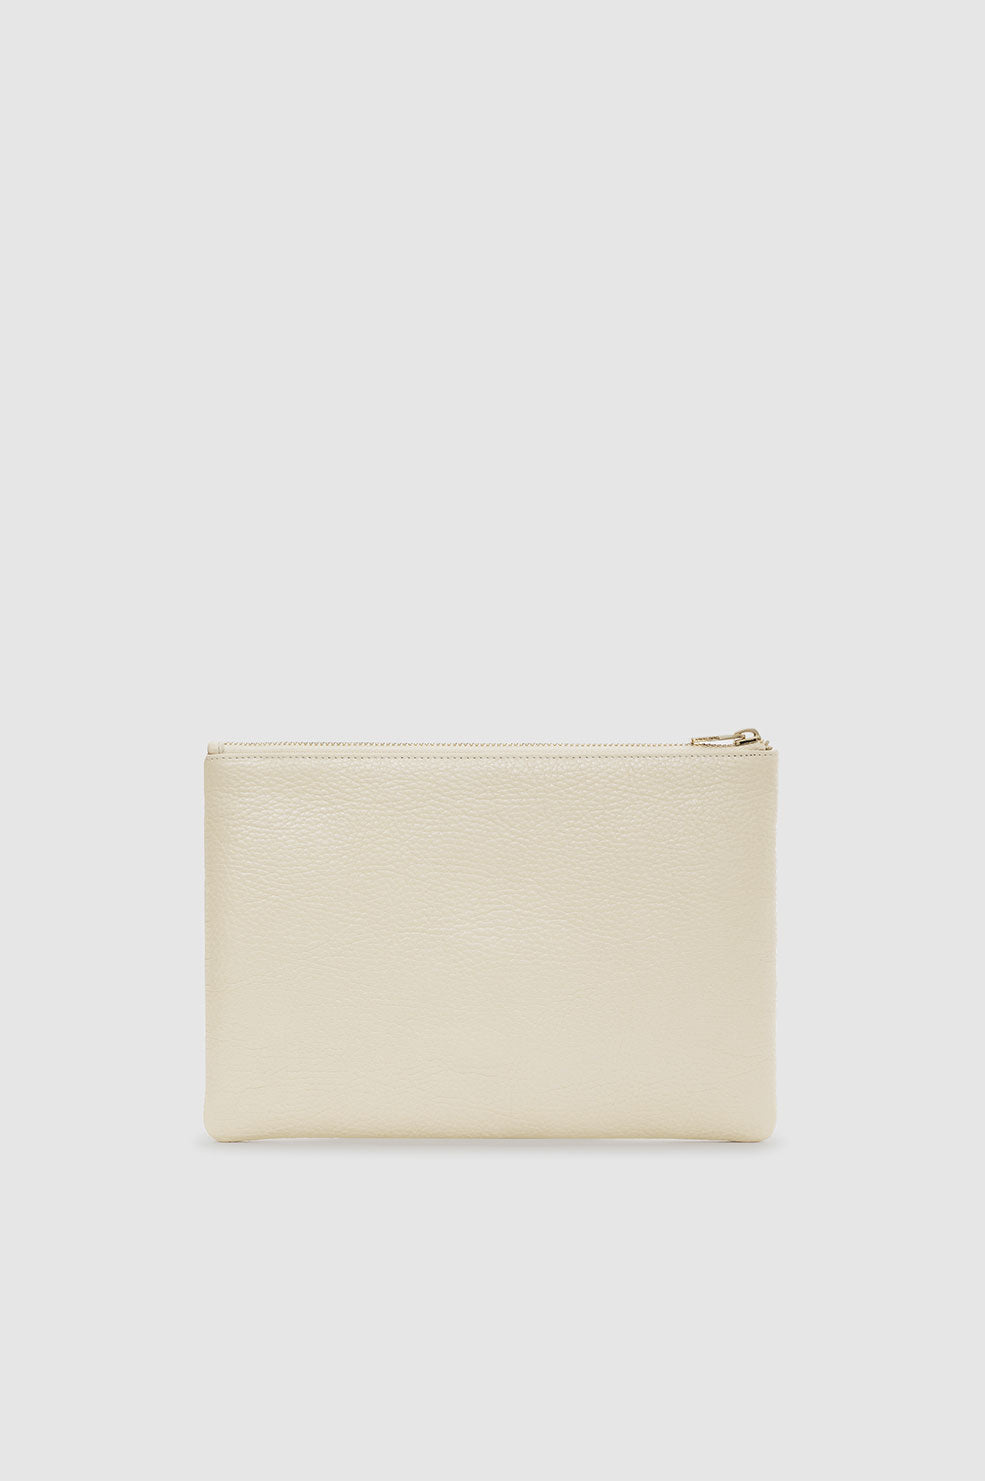 Anine Bing | Lili Pouch - Sand Pebbled